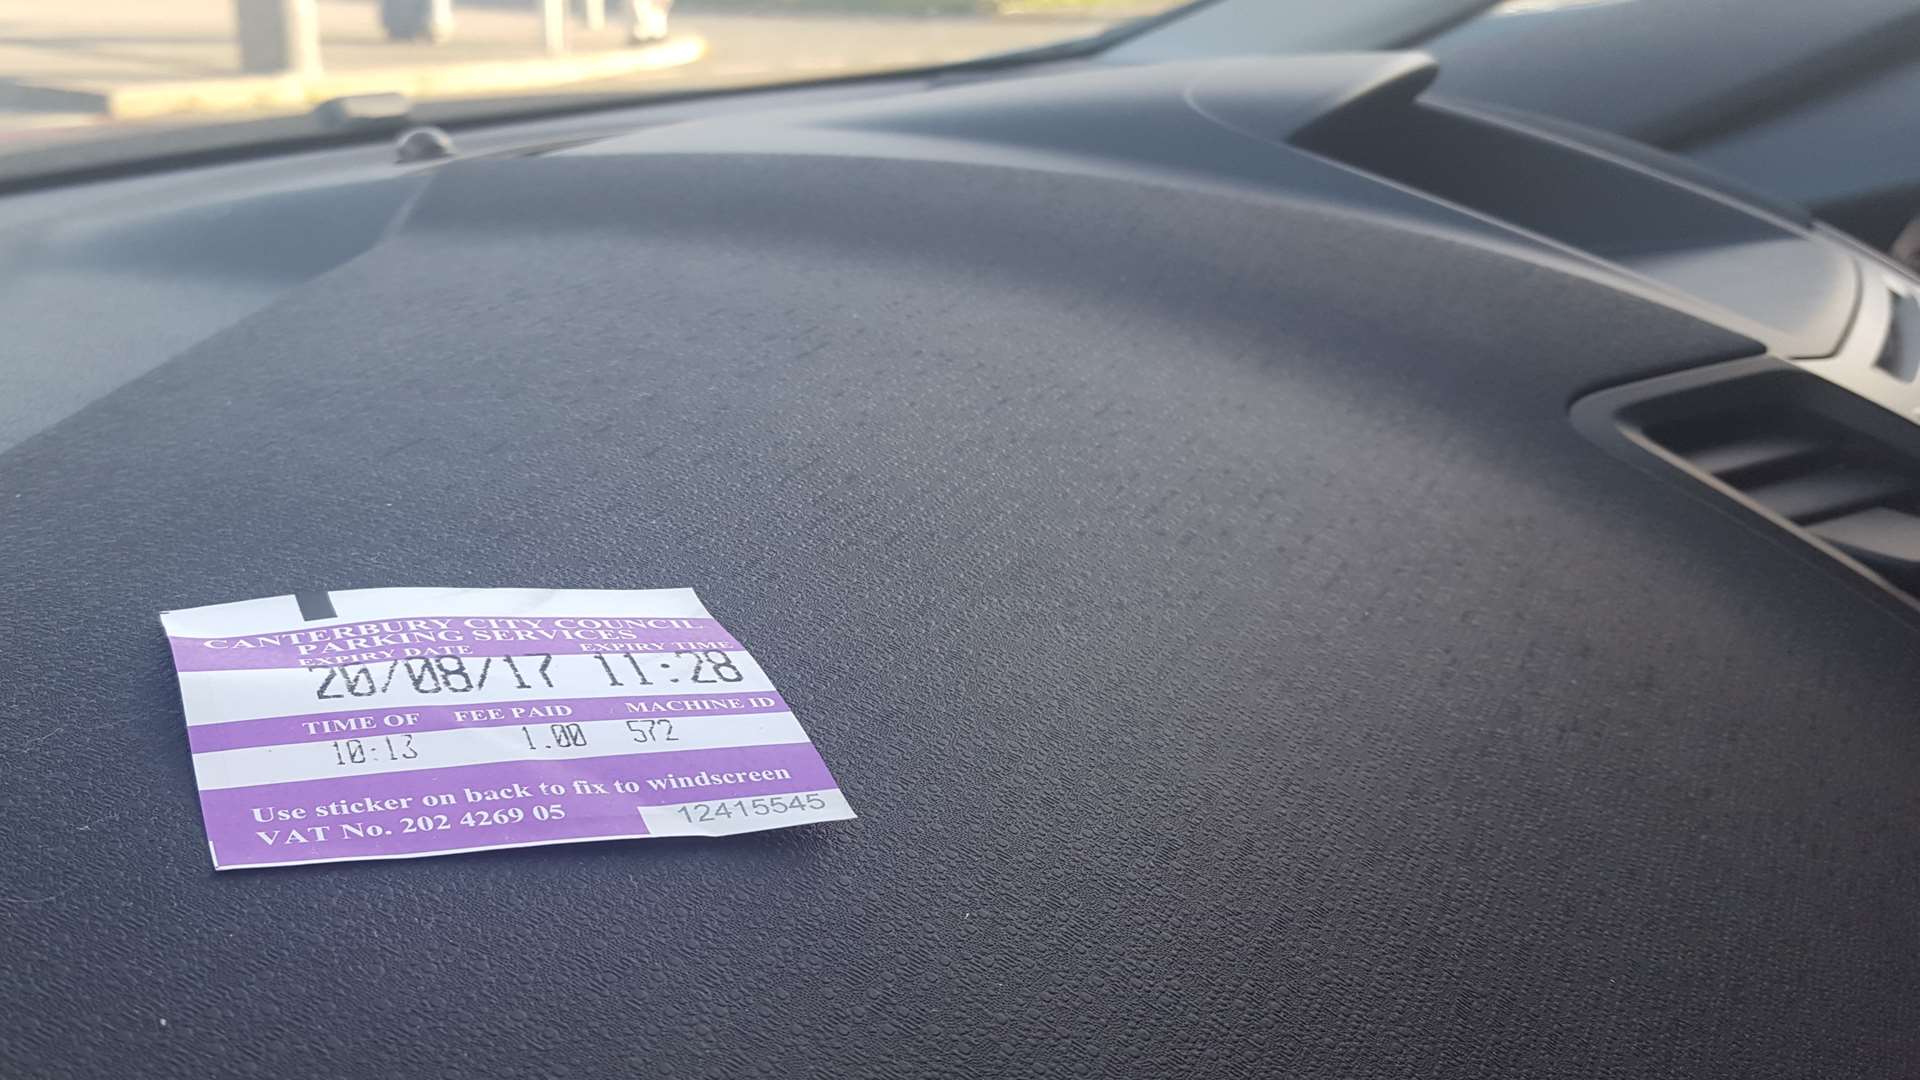 Parking tickets might become a thing of the past